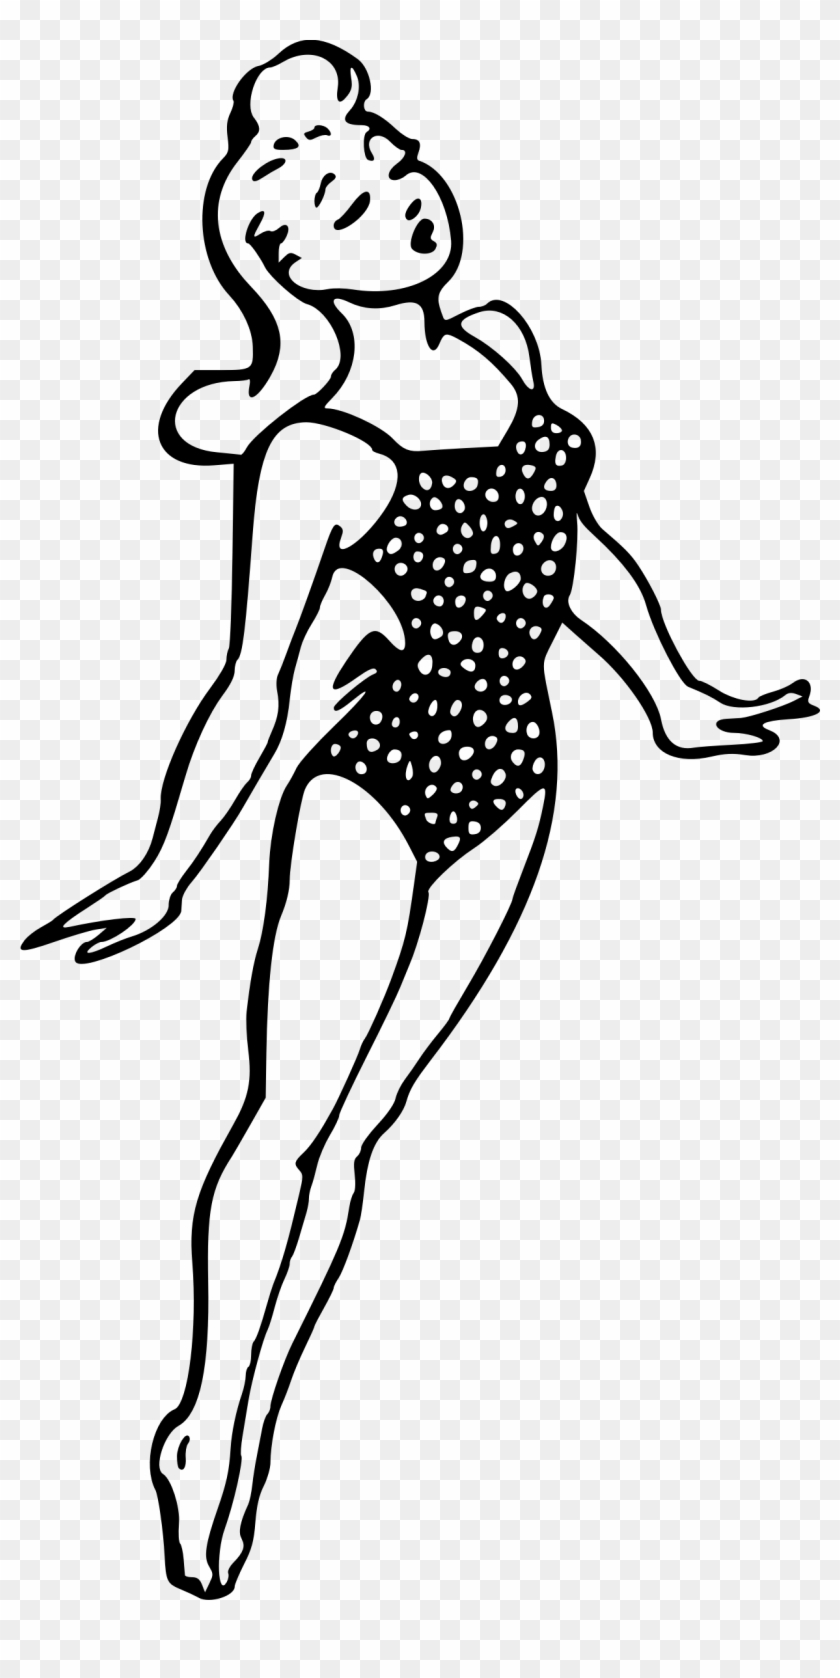 This Free Icons Png Design Of Lady In Swimsuit - Swimsuit Clipart #4968421